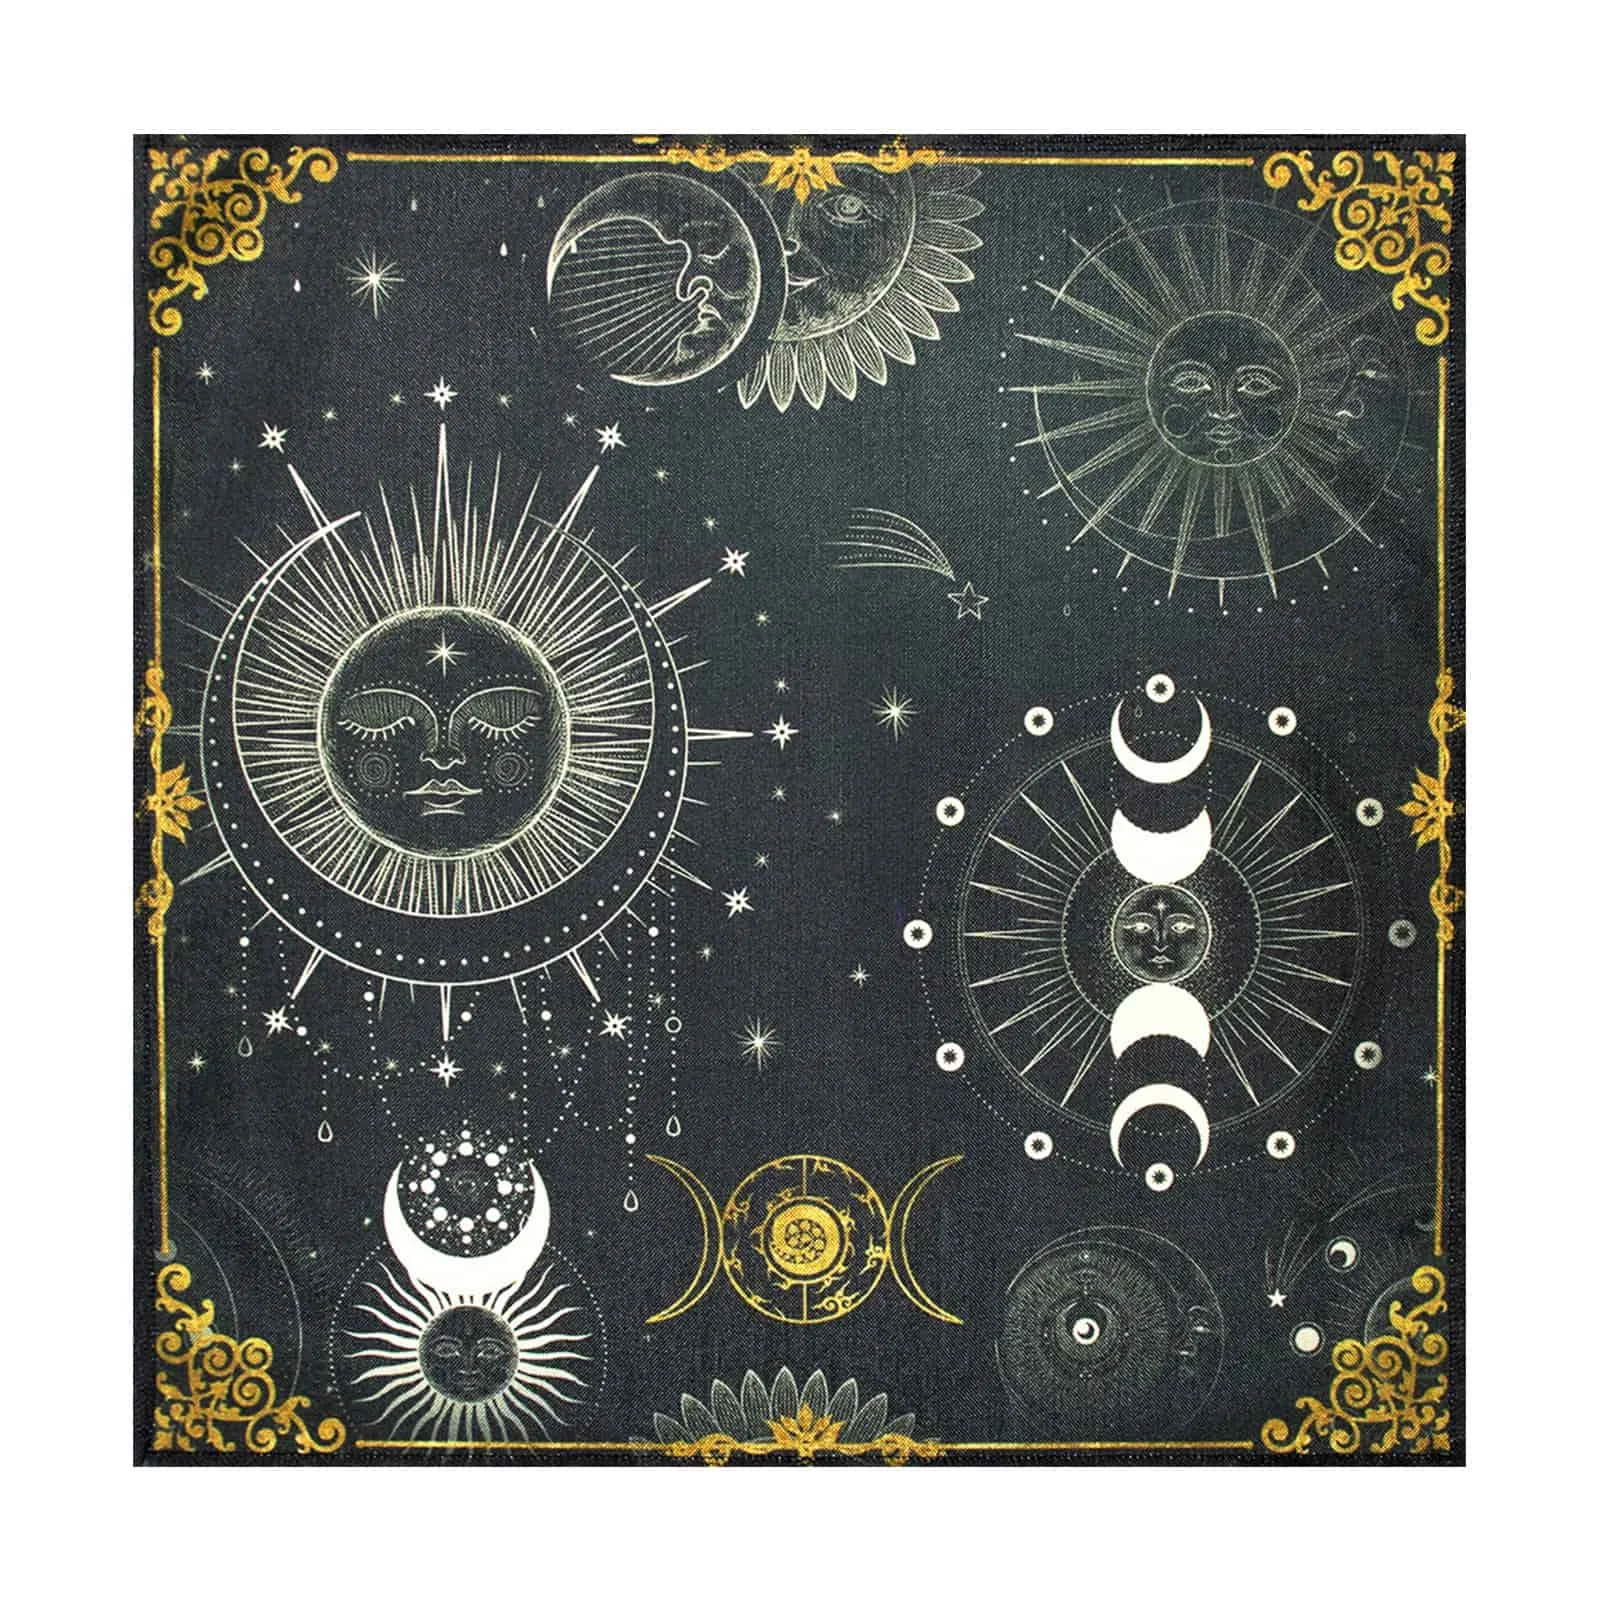 

Altar Tarot Card Cloth Tarot Cloth Moon Phases Astrology Witch Stuff Tarot Divination Cards Table Cloth Tapestry For Tarot Card